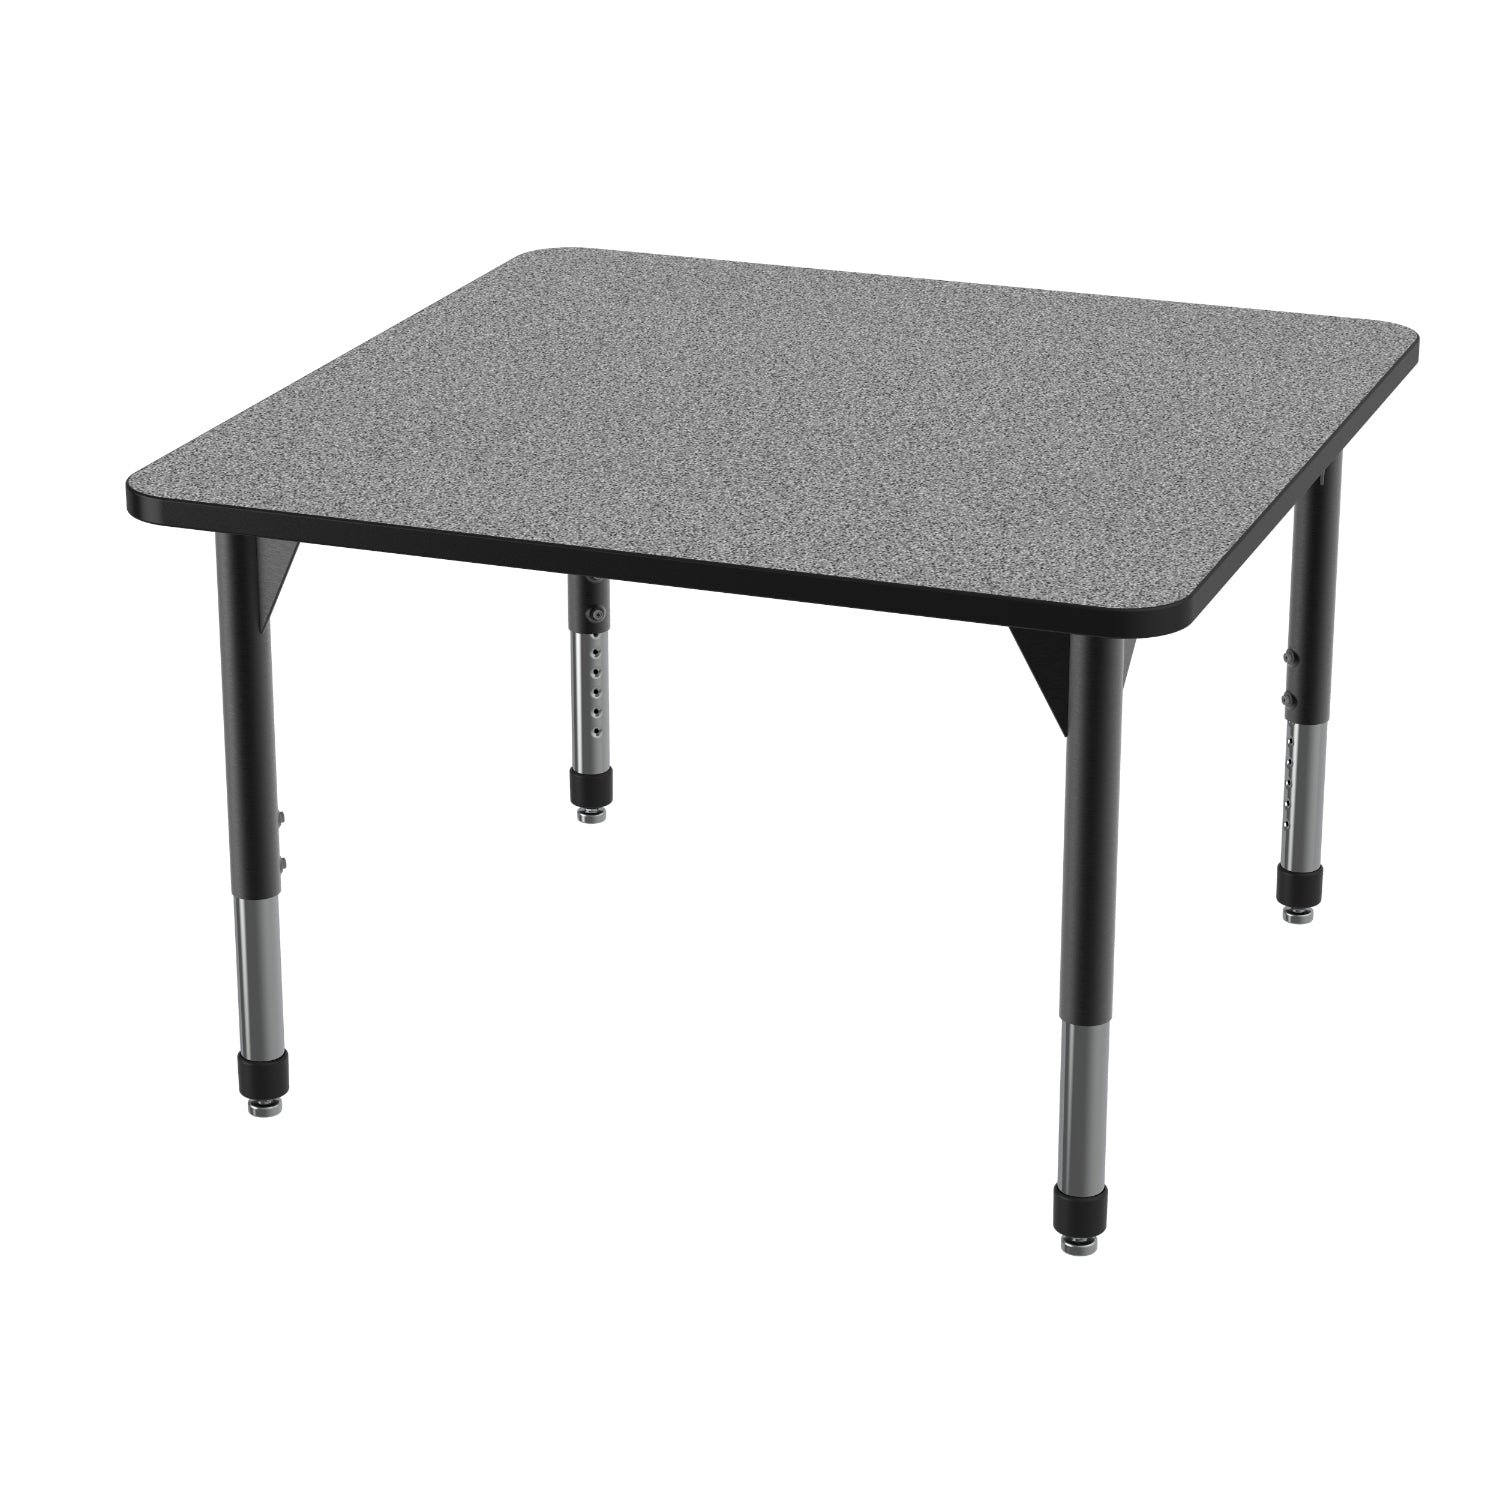 Premier Sitting Height Collaborative Classroom Table, 42" Square